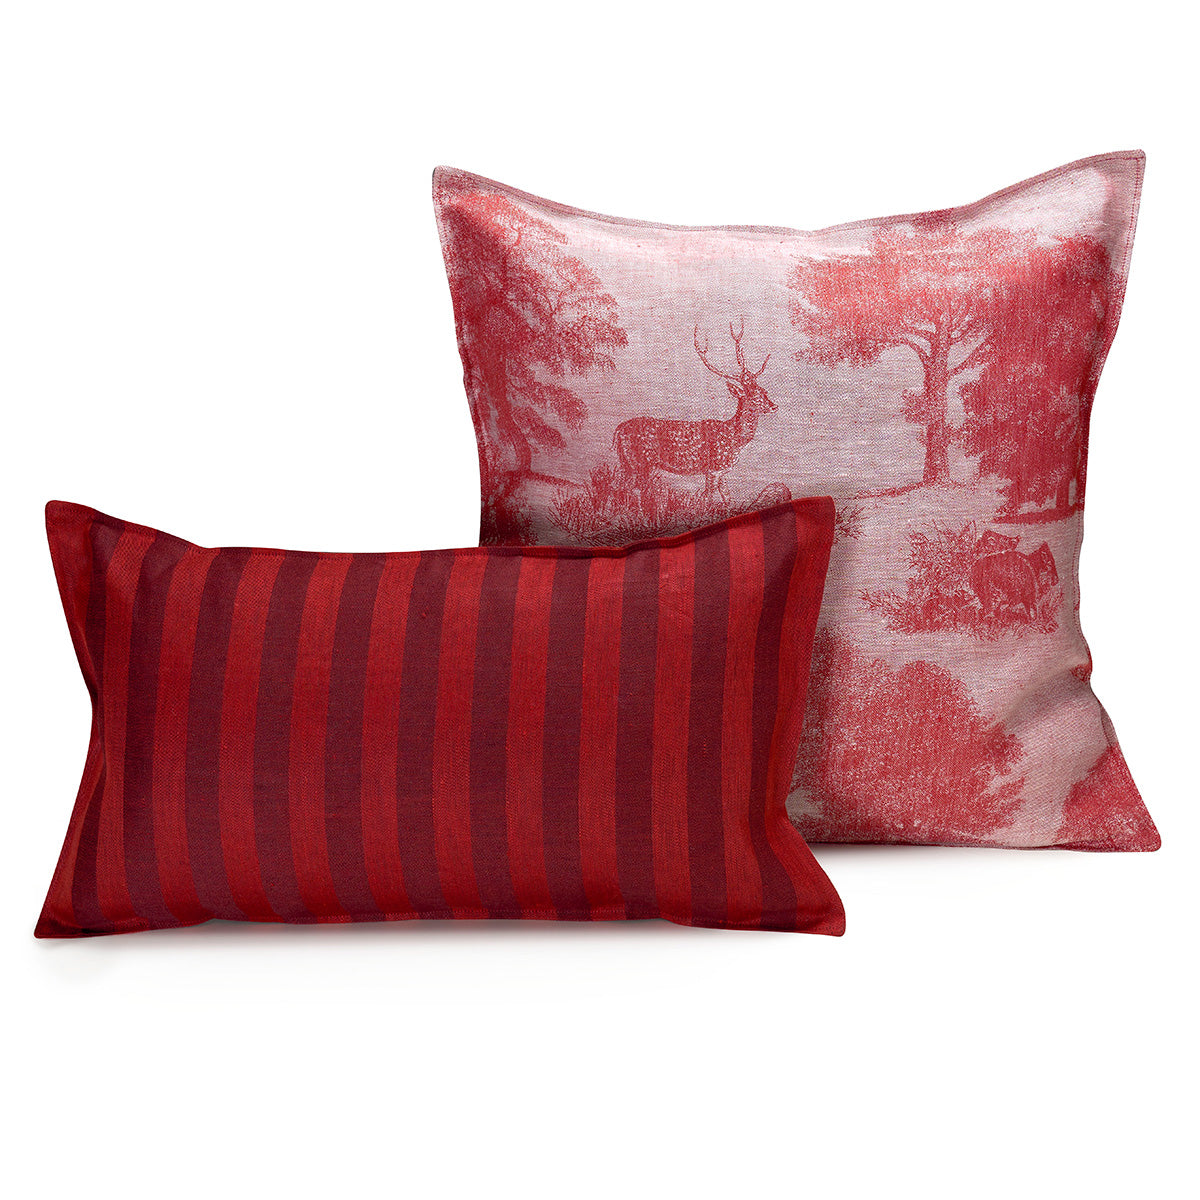 Throw Pillows in 2 sizes - Souveraine red cushion cover by Le Jacquard Francais